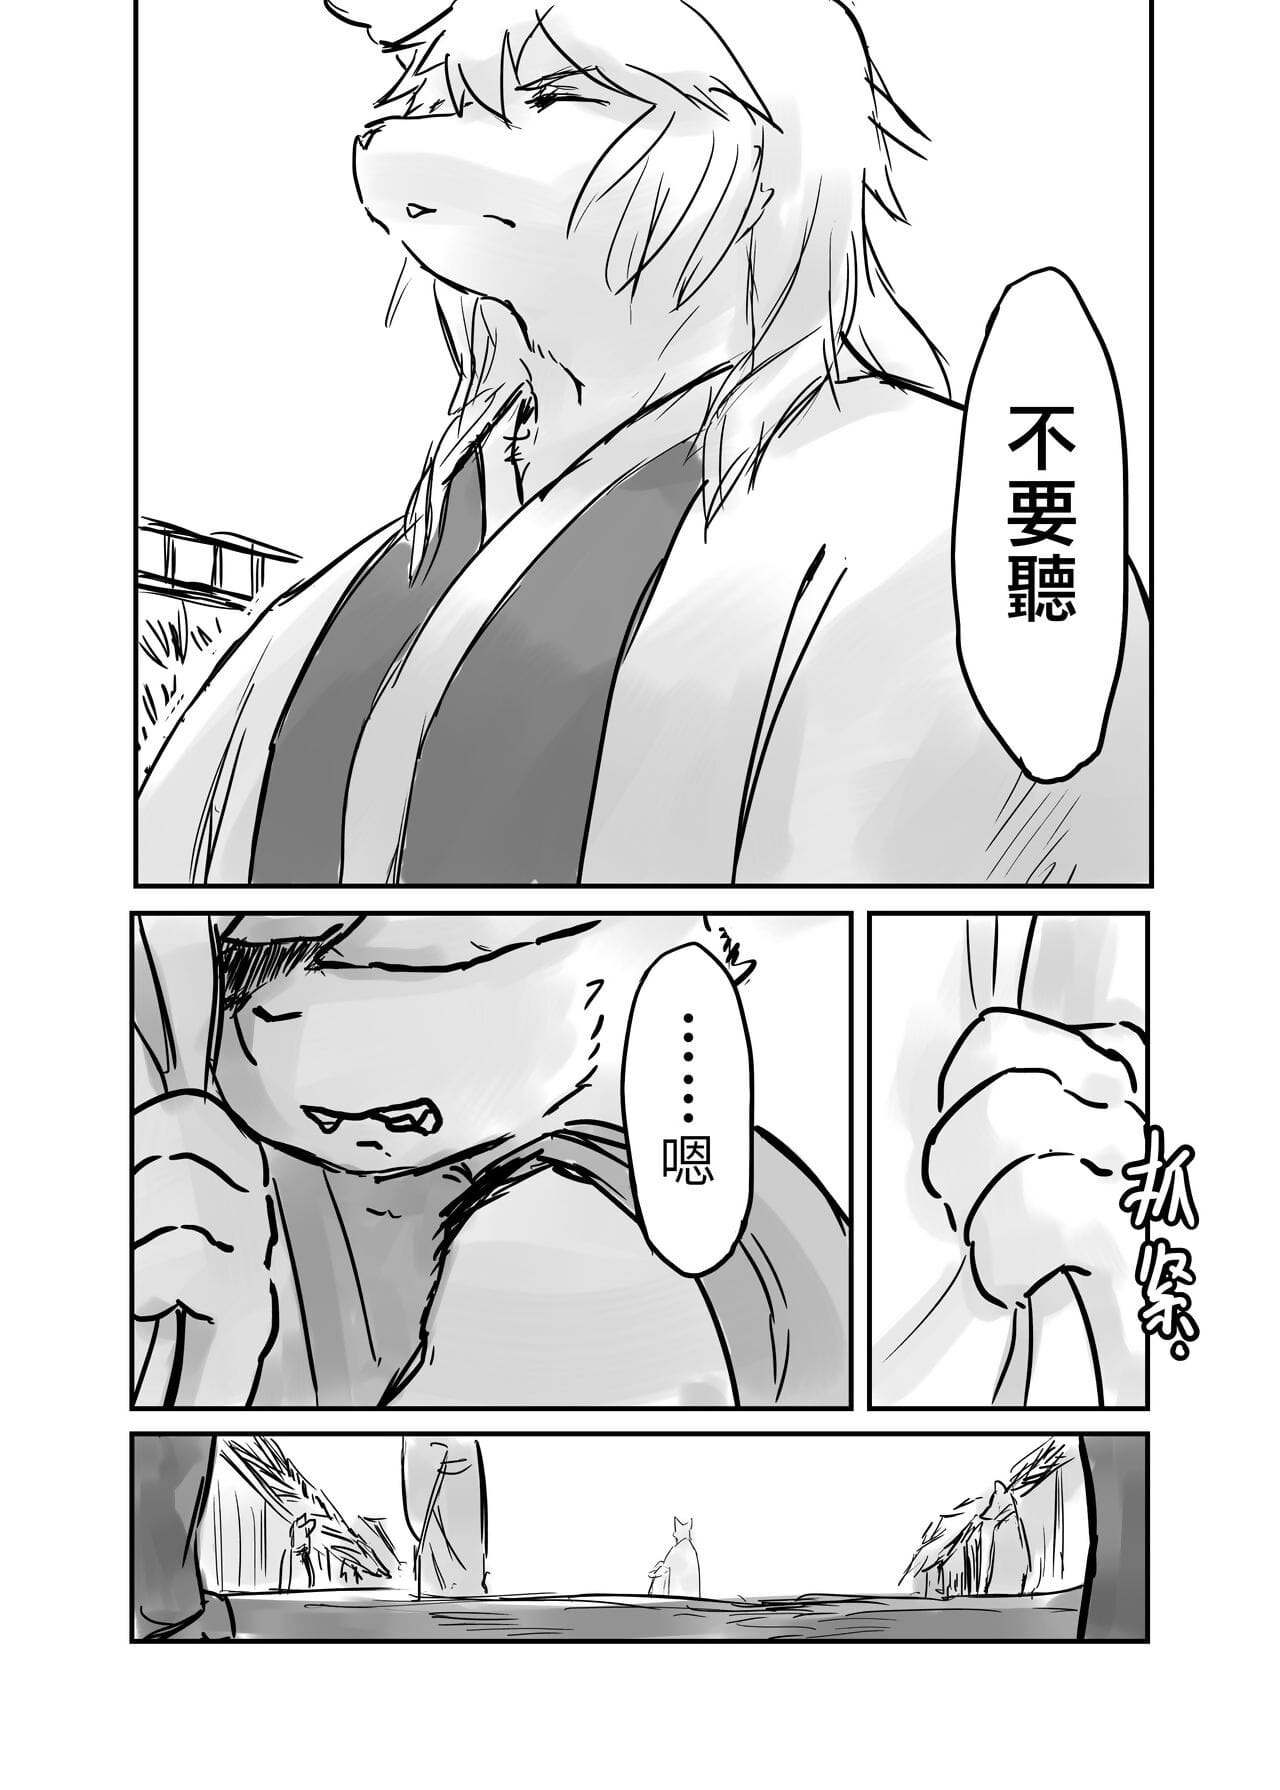 （the 访客 他乡之人 by：鬼流 一部分 2 page 1